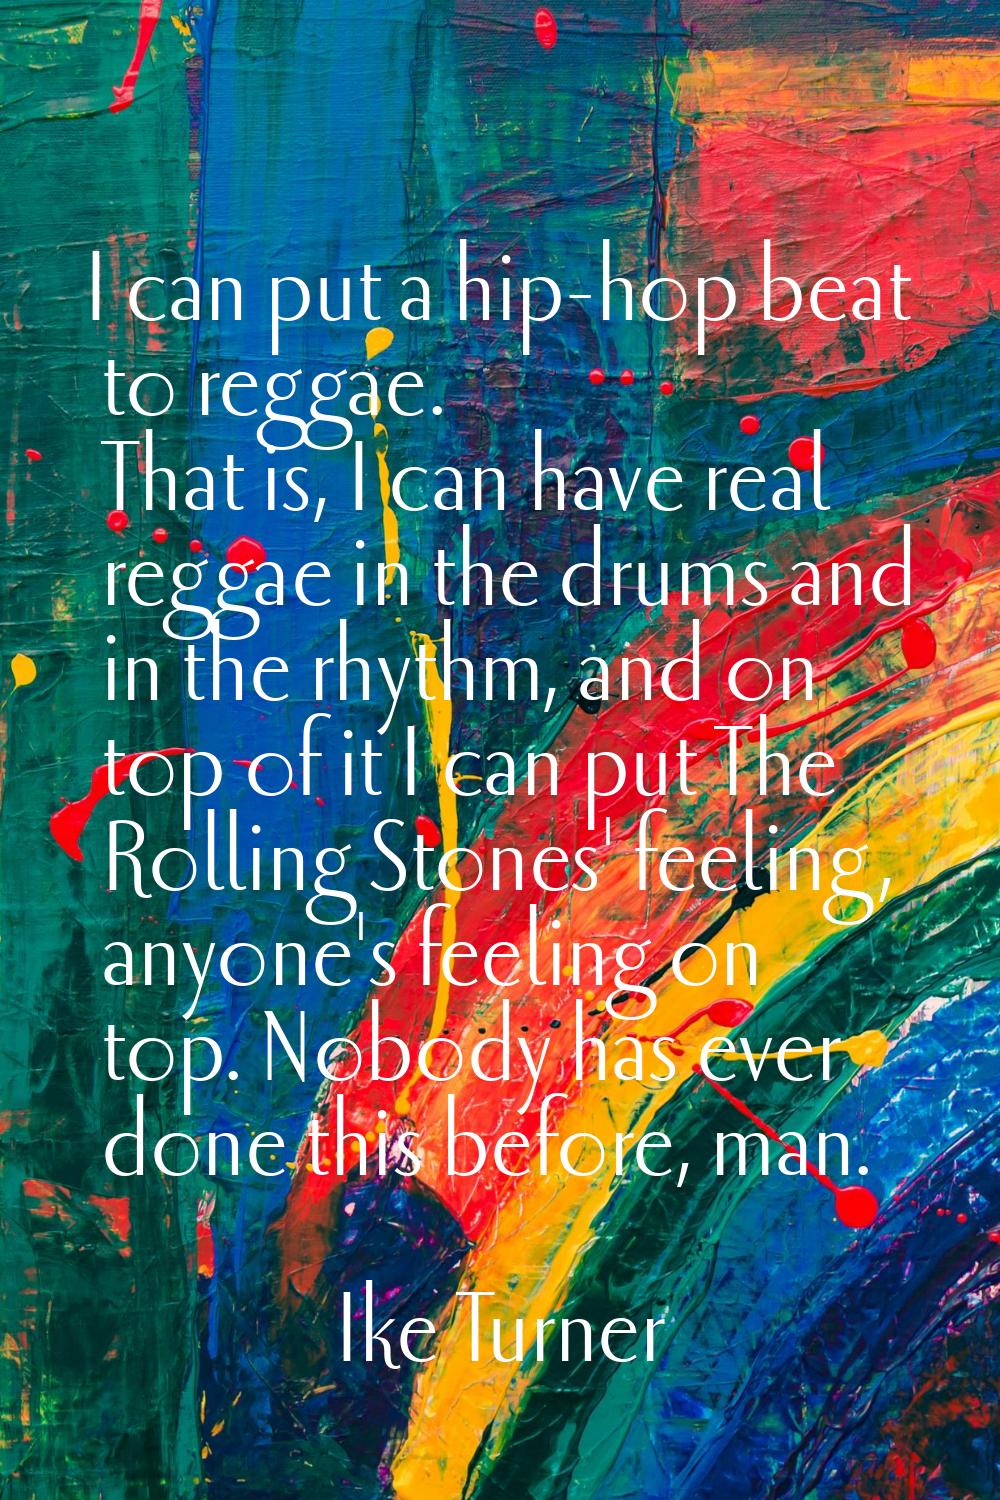 I can put a hip-hop beat to reggae. That is, I can have real reggae in the drums and in the rhythm,